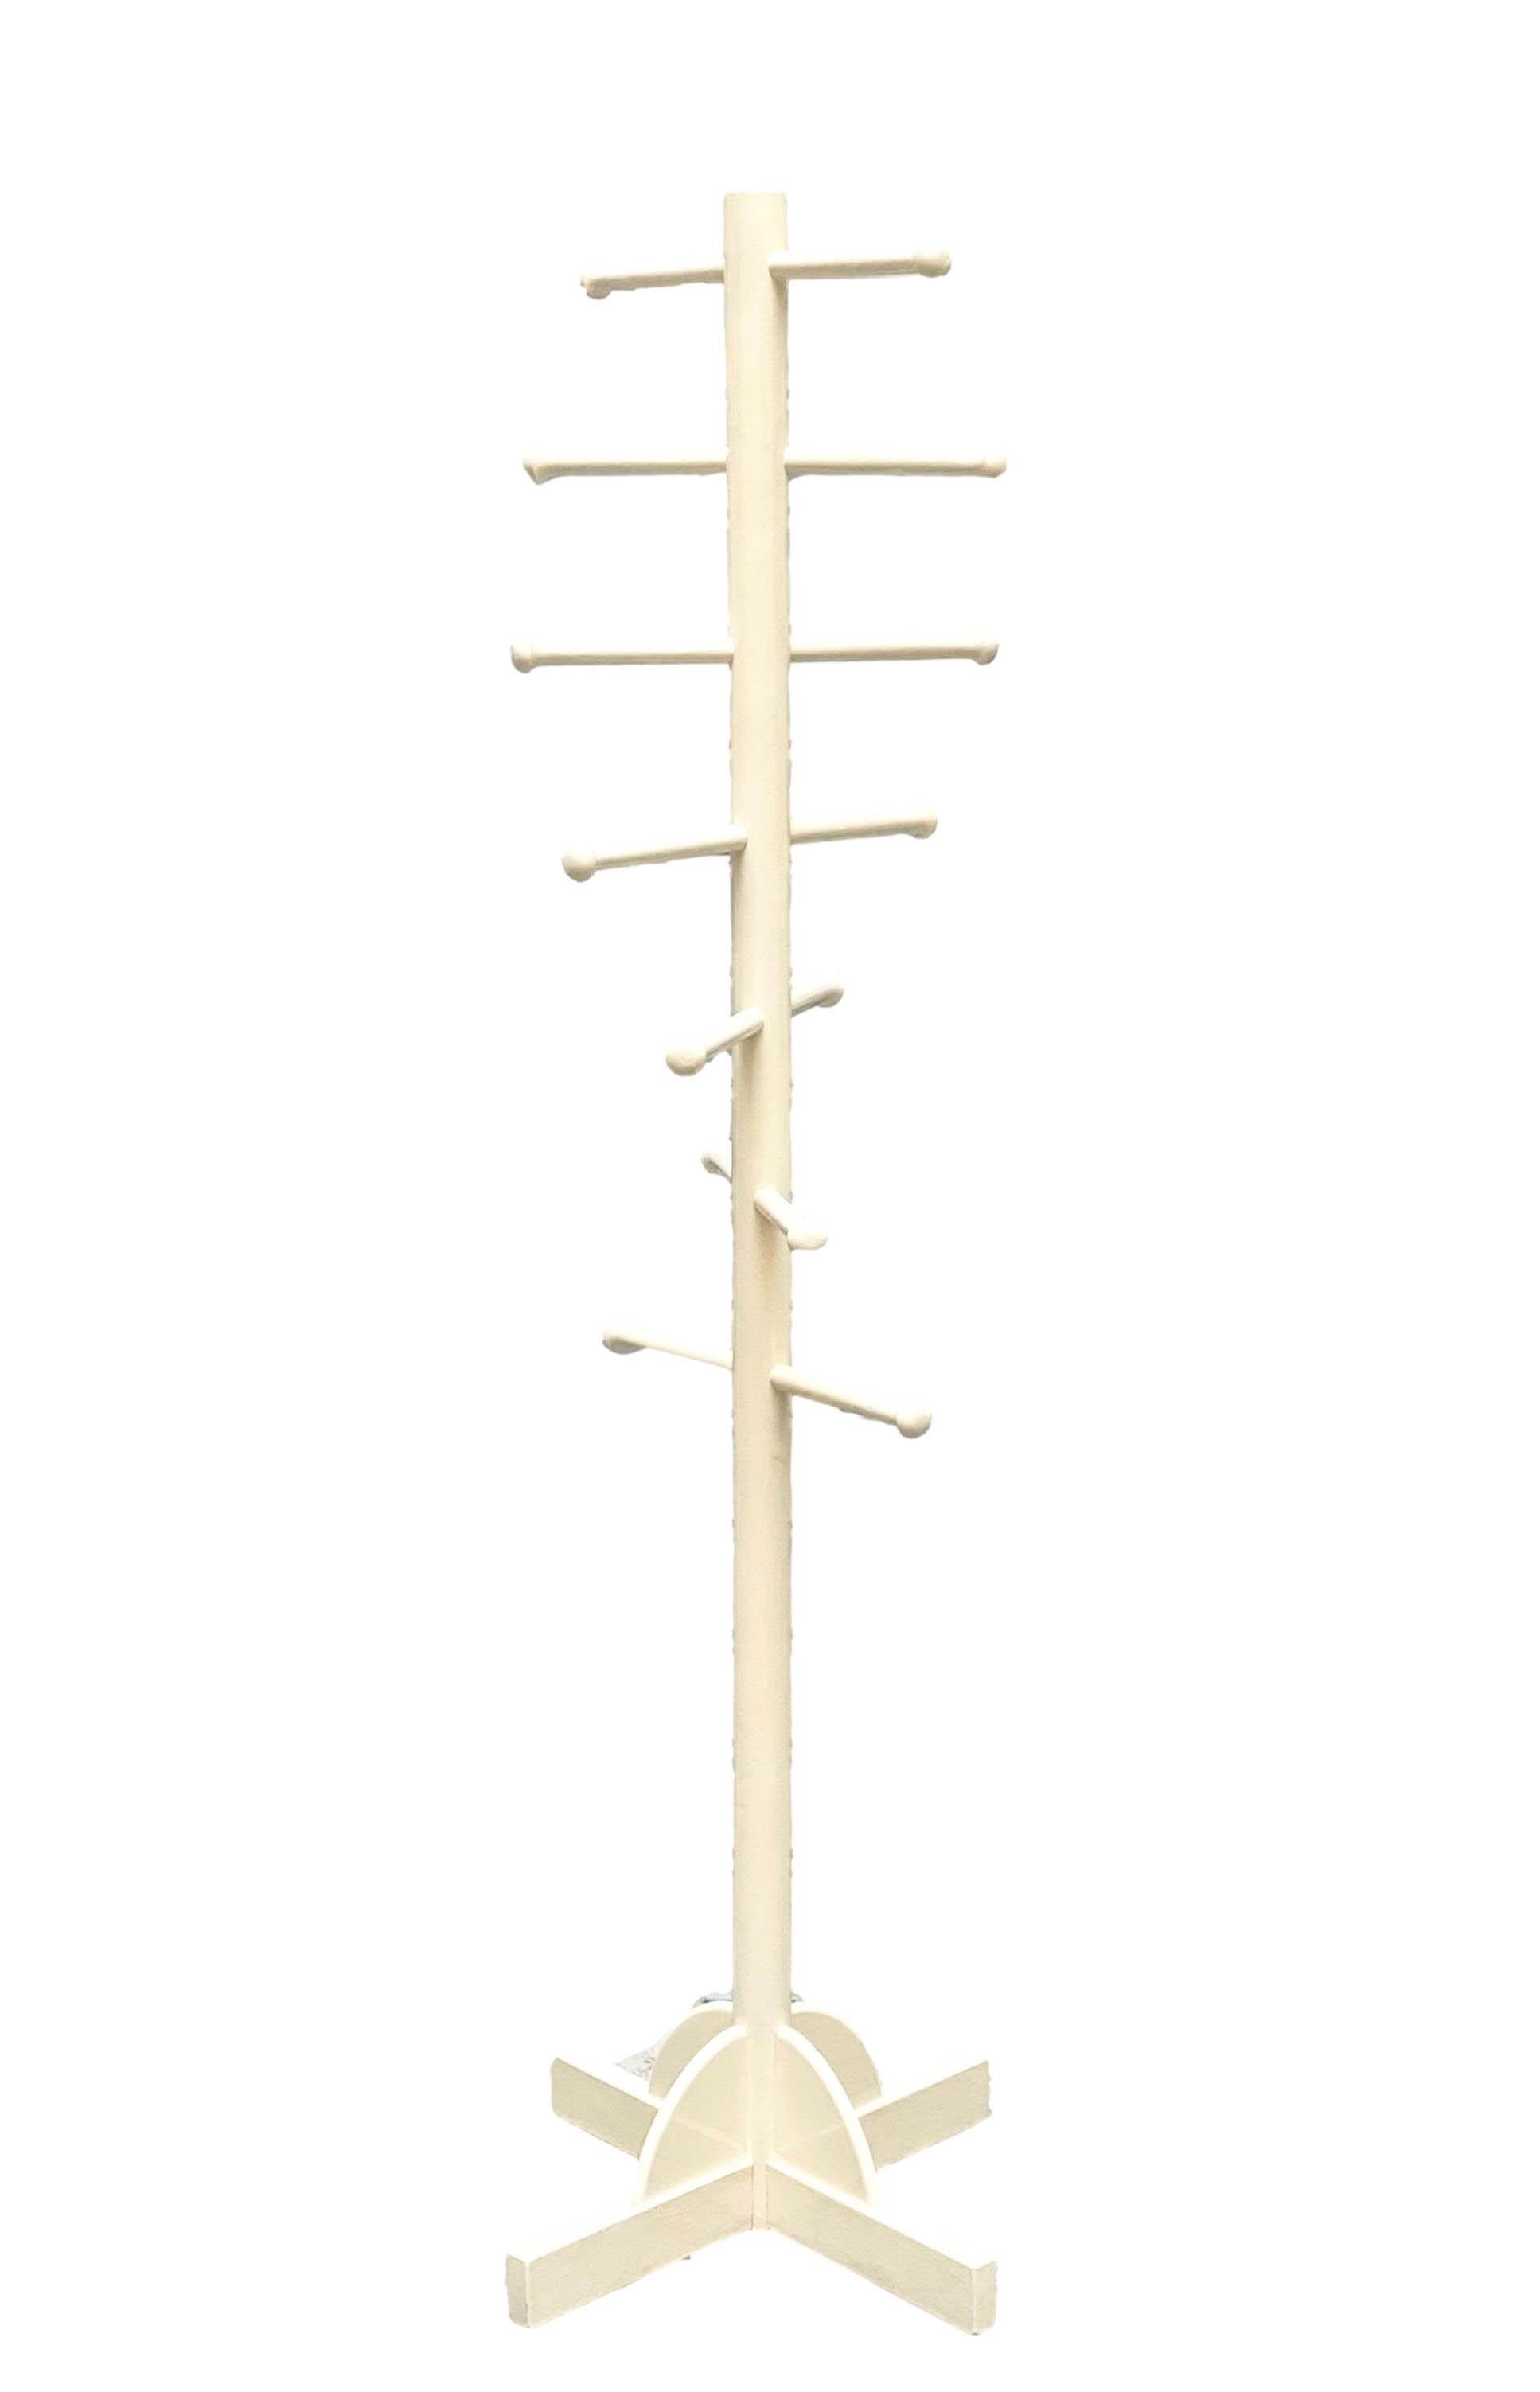 Lovely example of Sottsass' iconic coat stand finished in the original ivory lacquer over a cascading spiraling form wooden structure.

Sergio Cammilli's 'Poltronova' were at the forefront of cutting edge radical Italian design during this highly